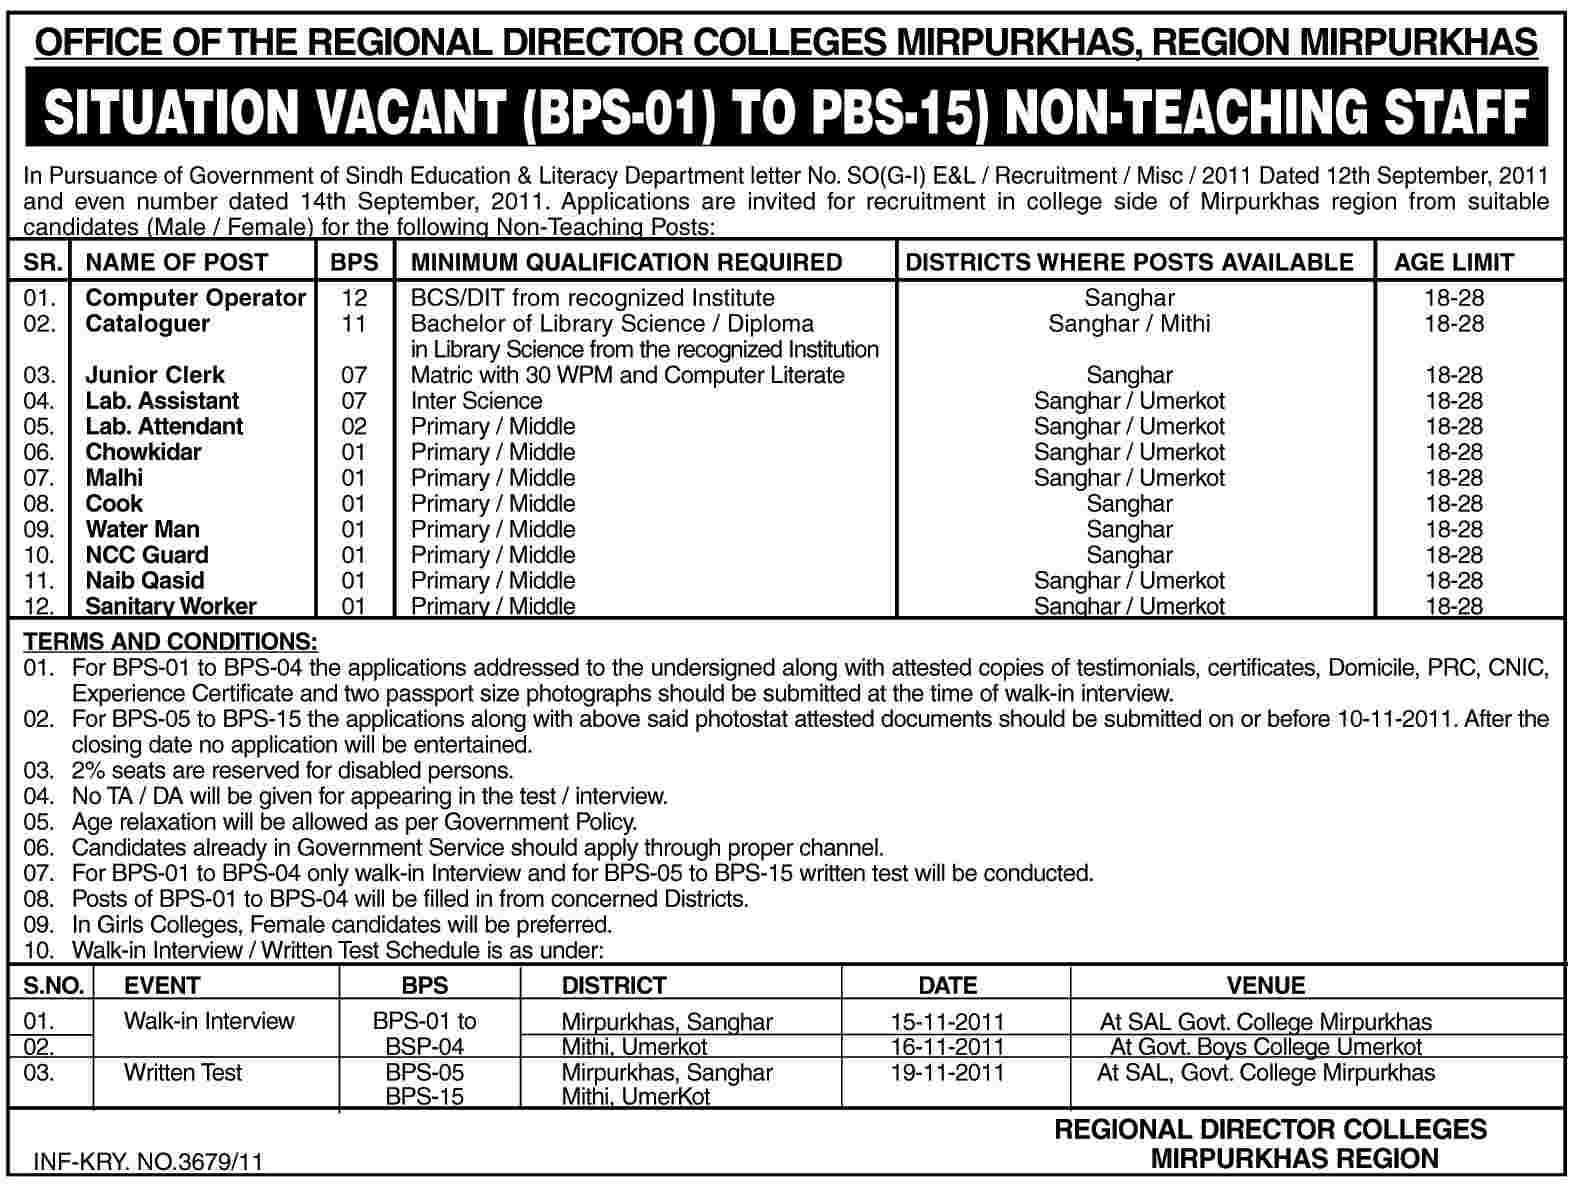 Office of the Regional Director College Mirpurkhas, Region Mirpur Positions Vacant